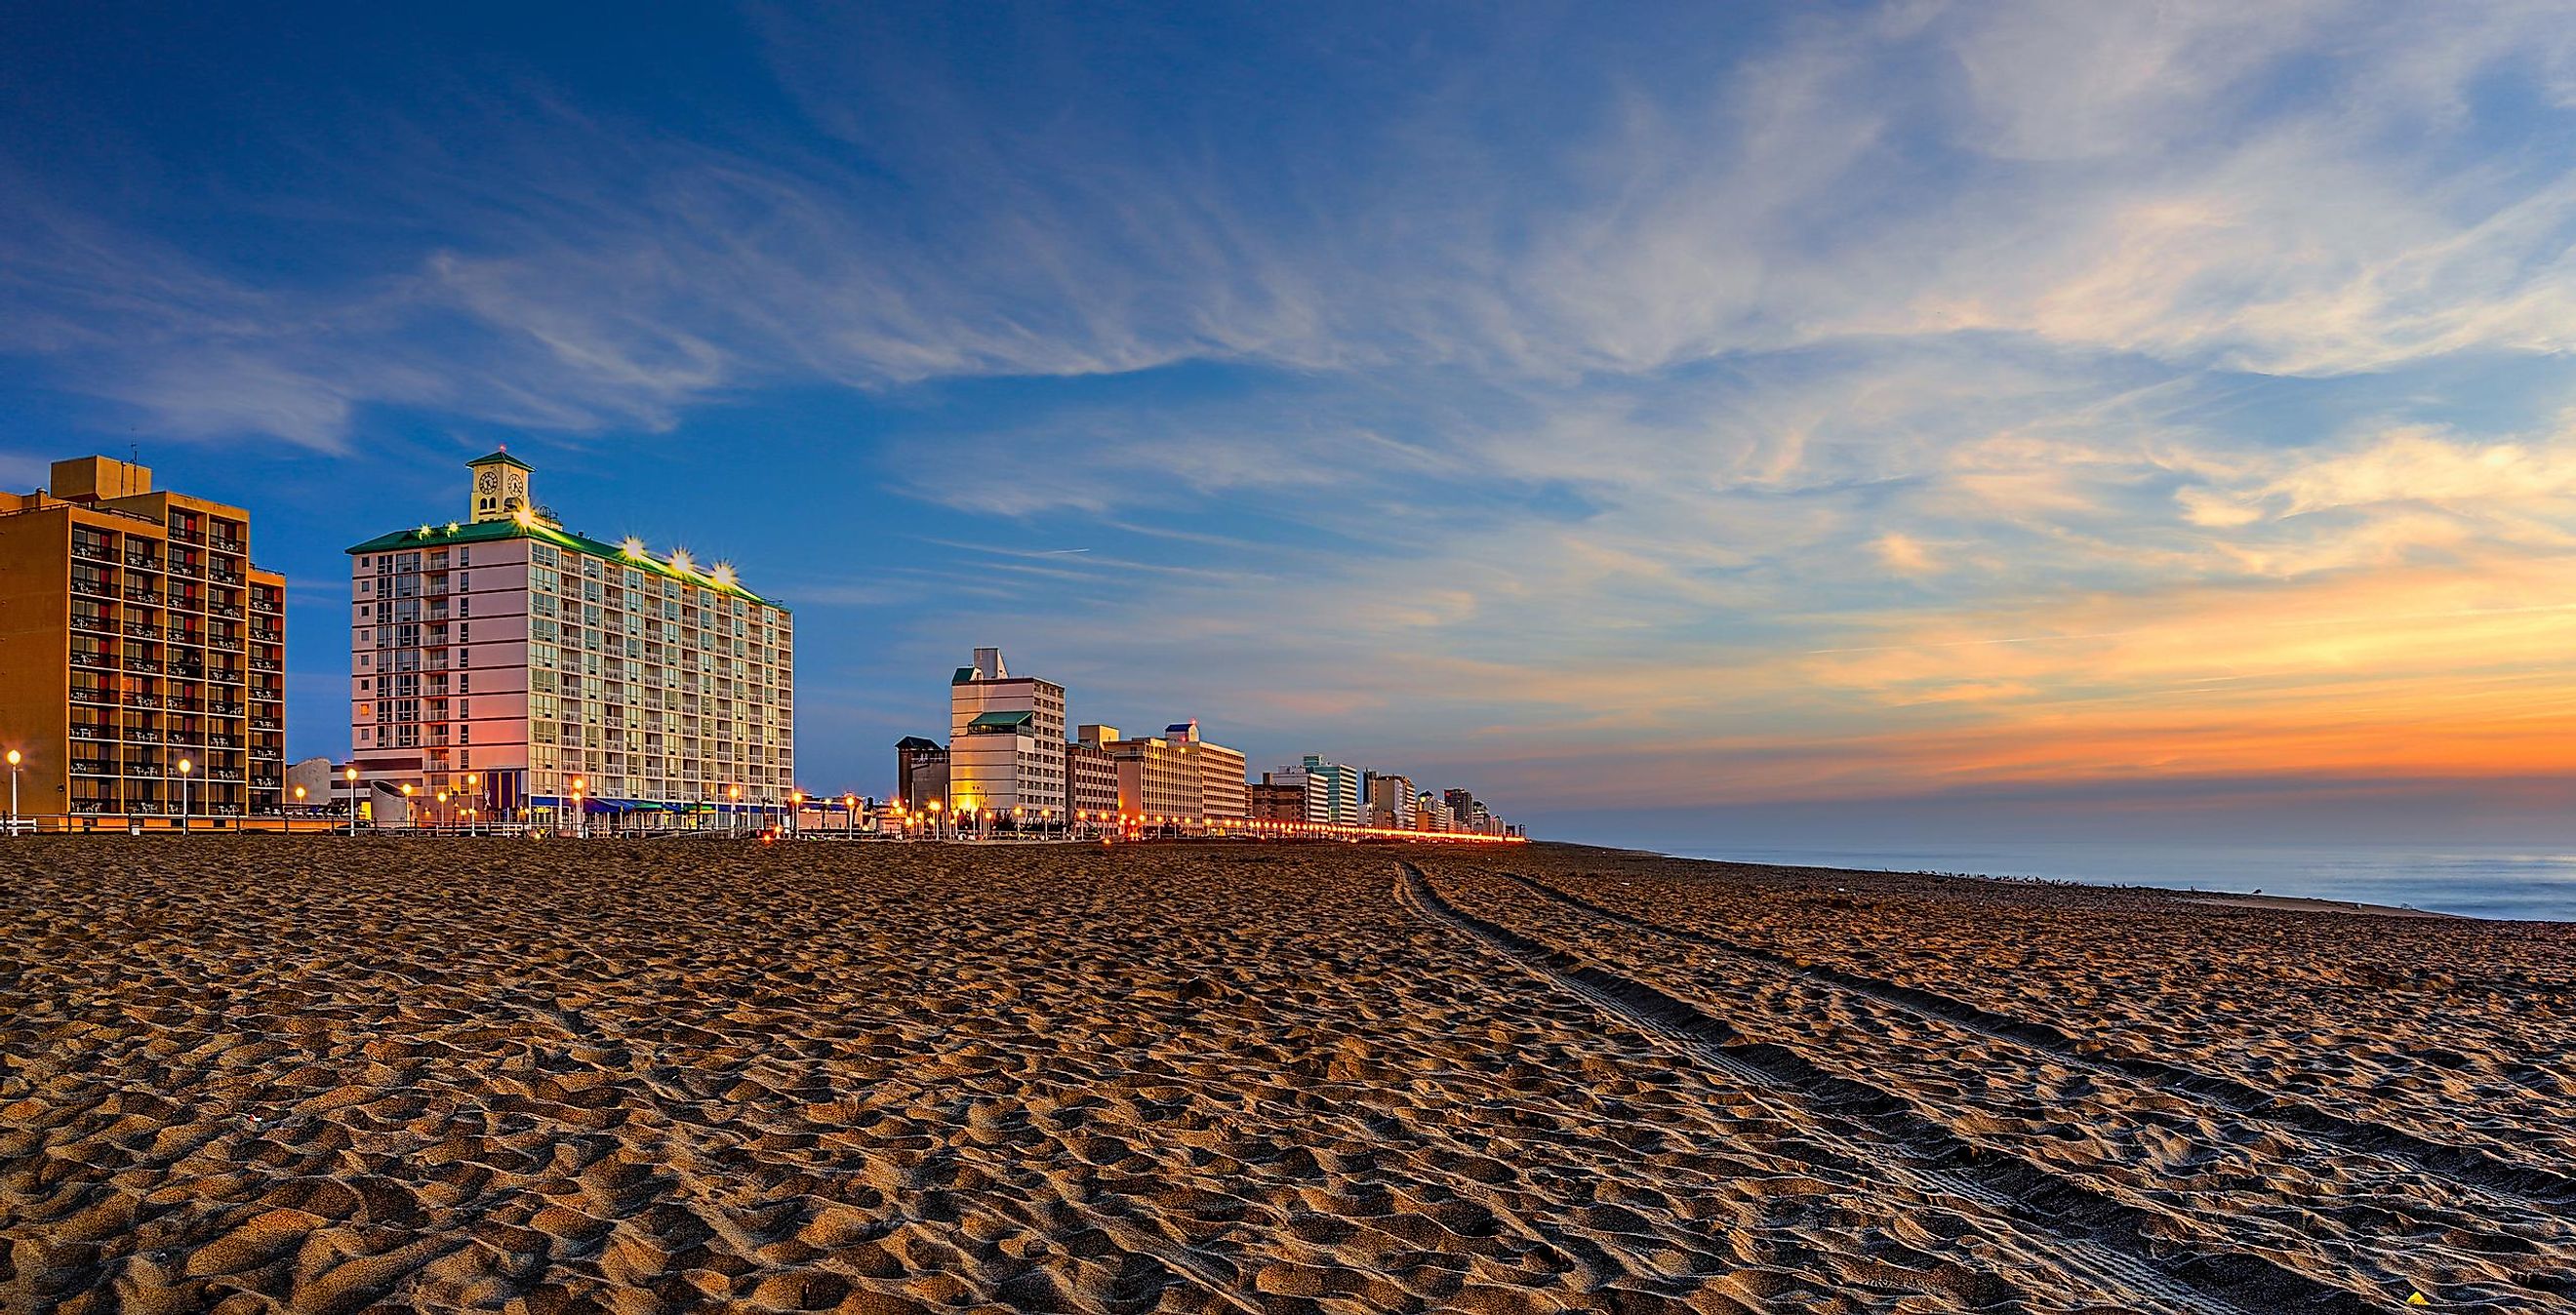 Virginia Beach, Virginia at sunset with lights on the boardwalk and buildings in the background. Image credit jomo333 via AdobeStock.